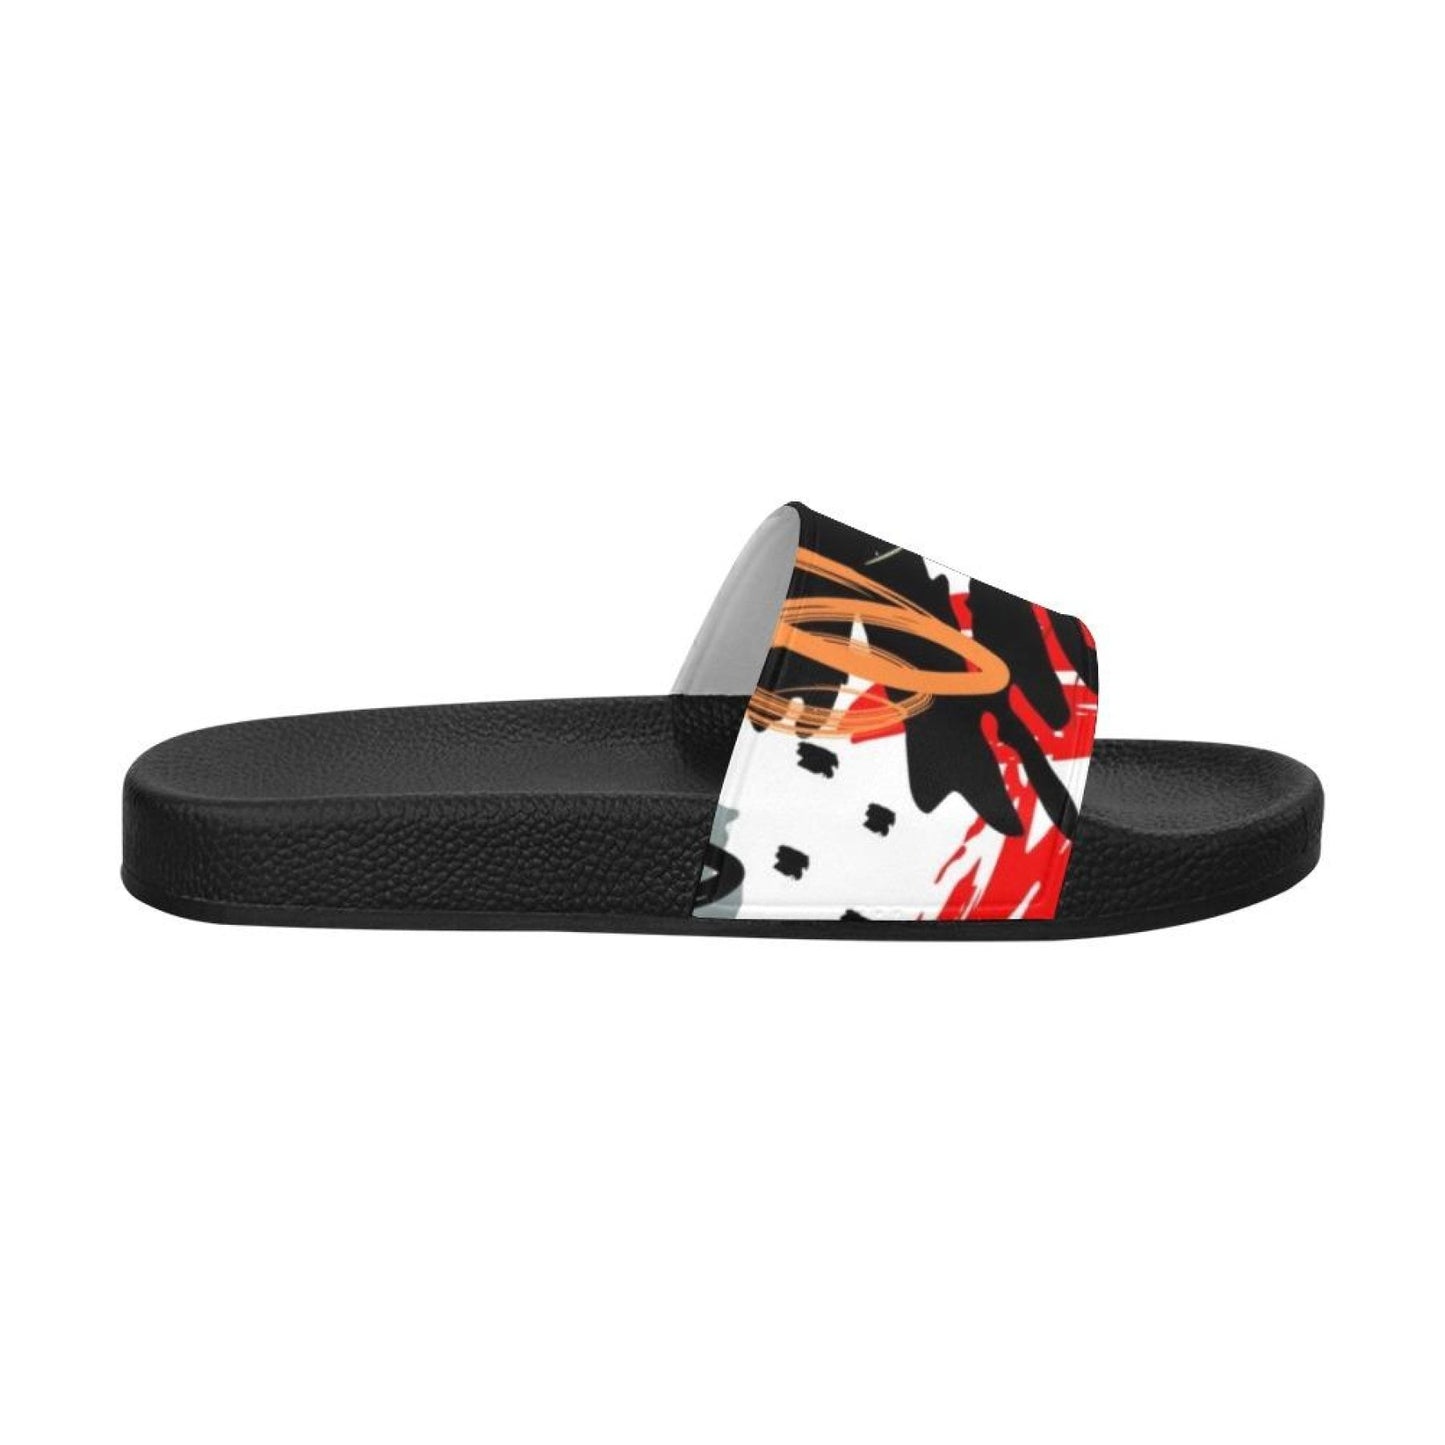 Uniquely You Womens Slides / Flip-Flop Sandals - Red Black And White